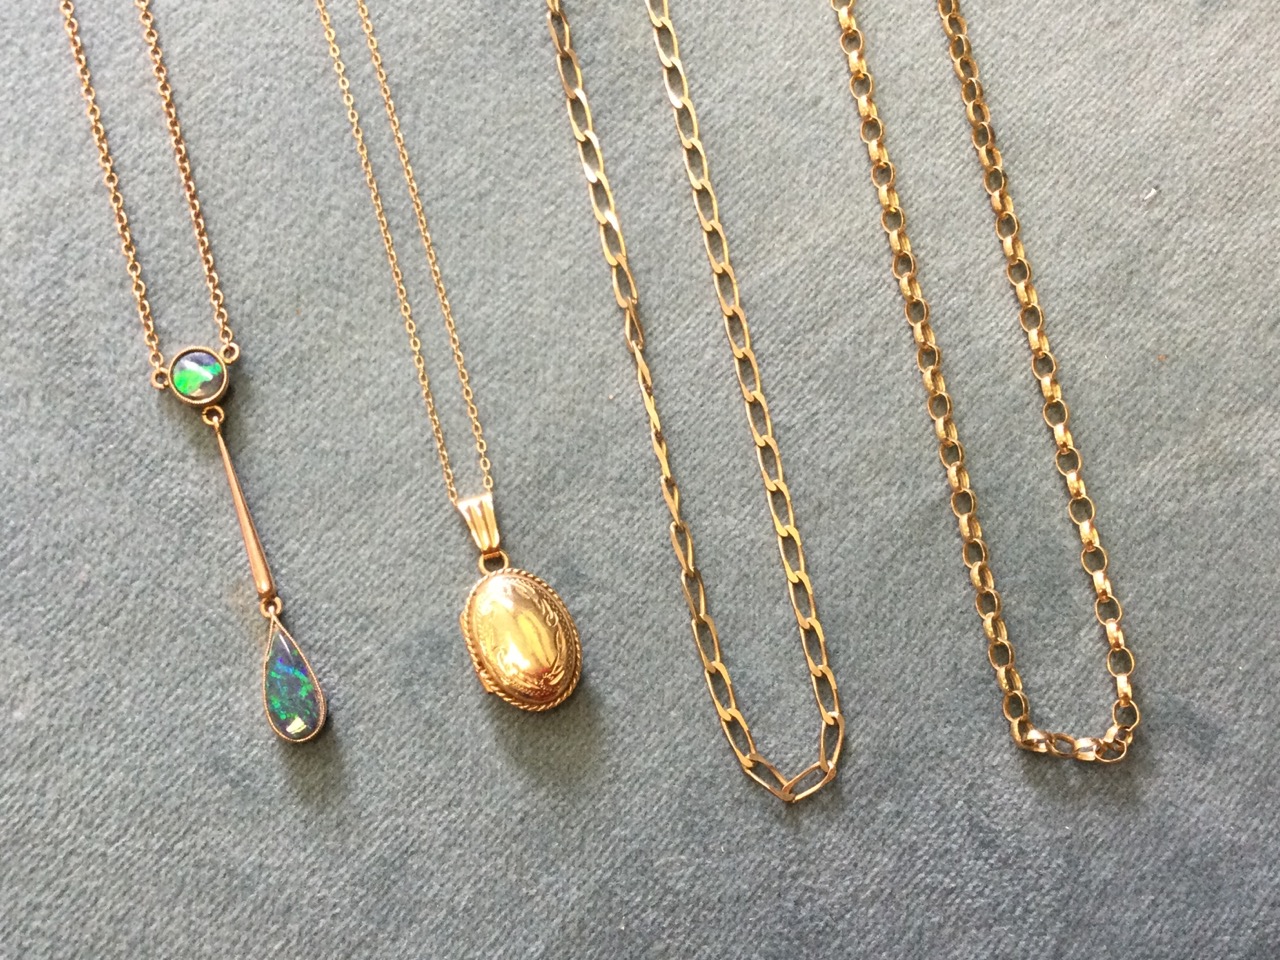 A 9ct gold mounted opal pendant on chain; a small oval 9ct gold locket on fine chain; and two long